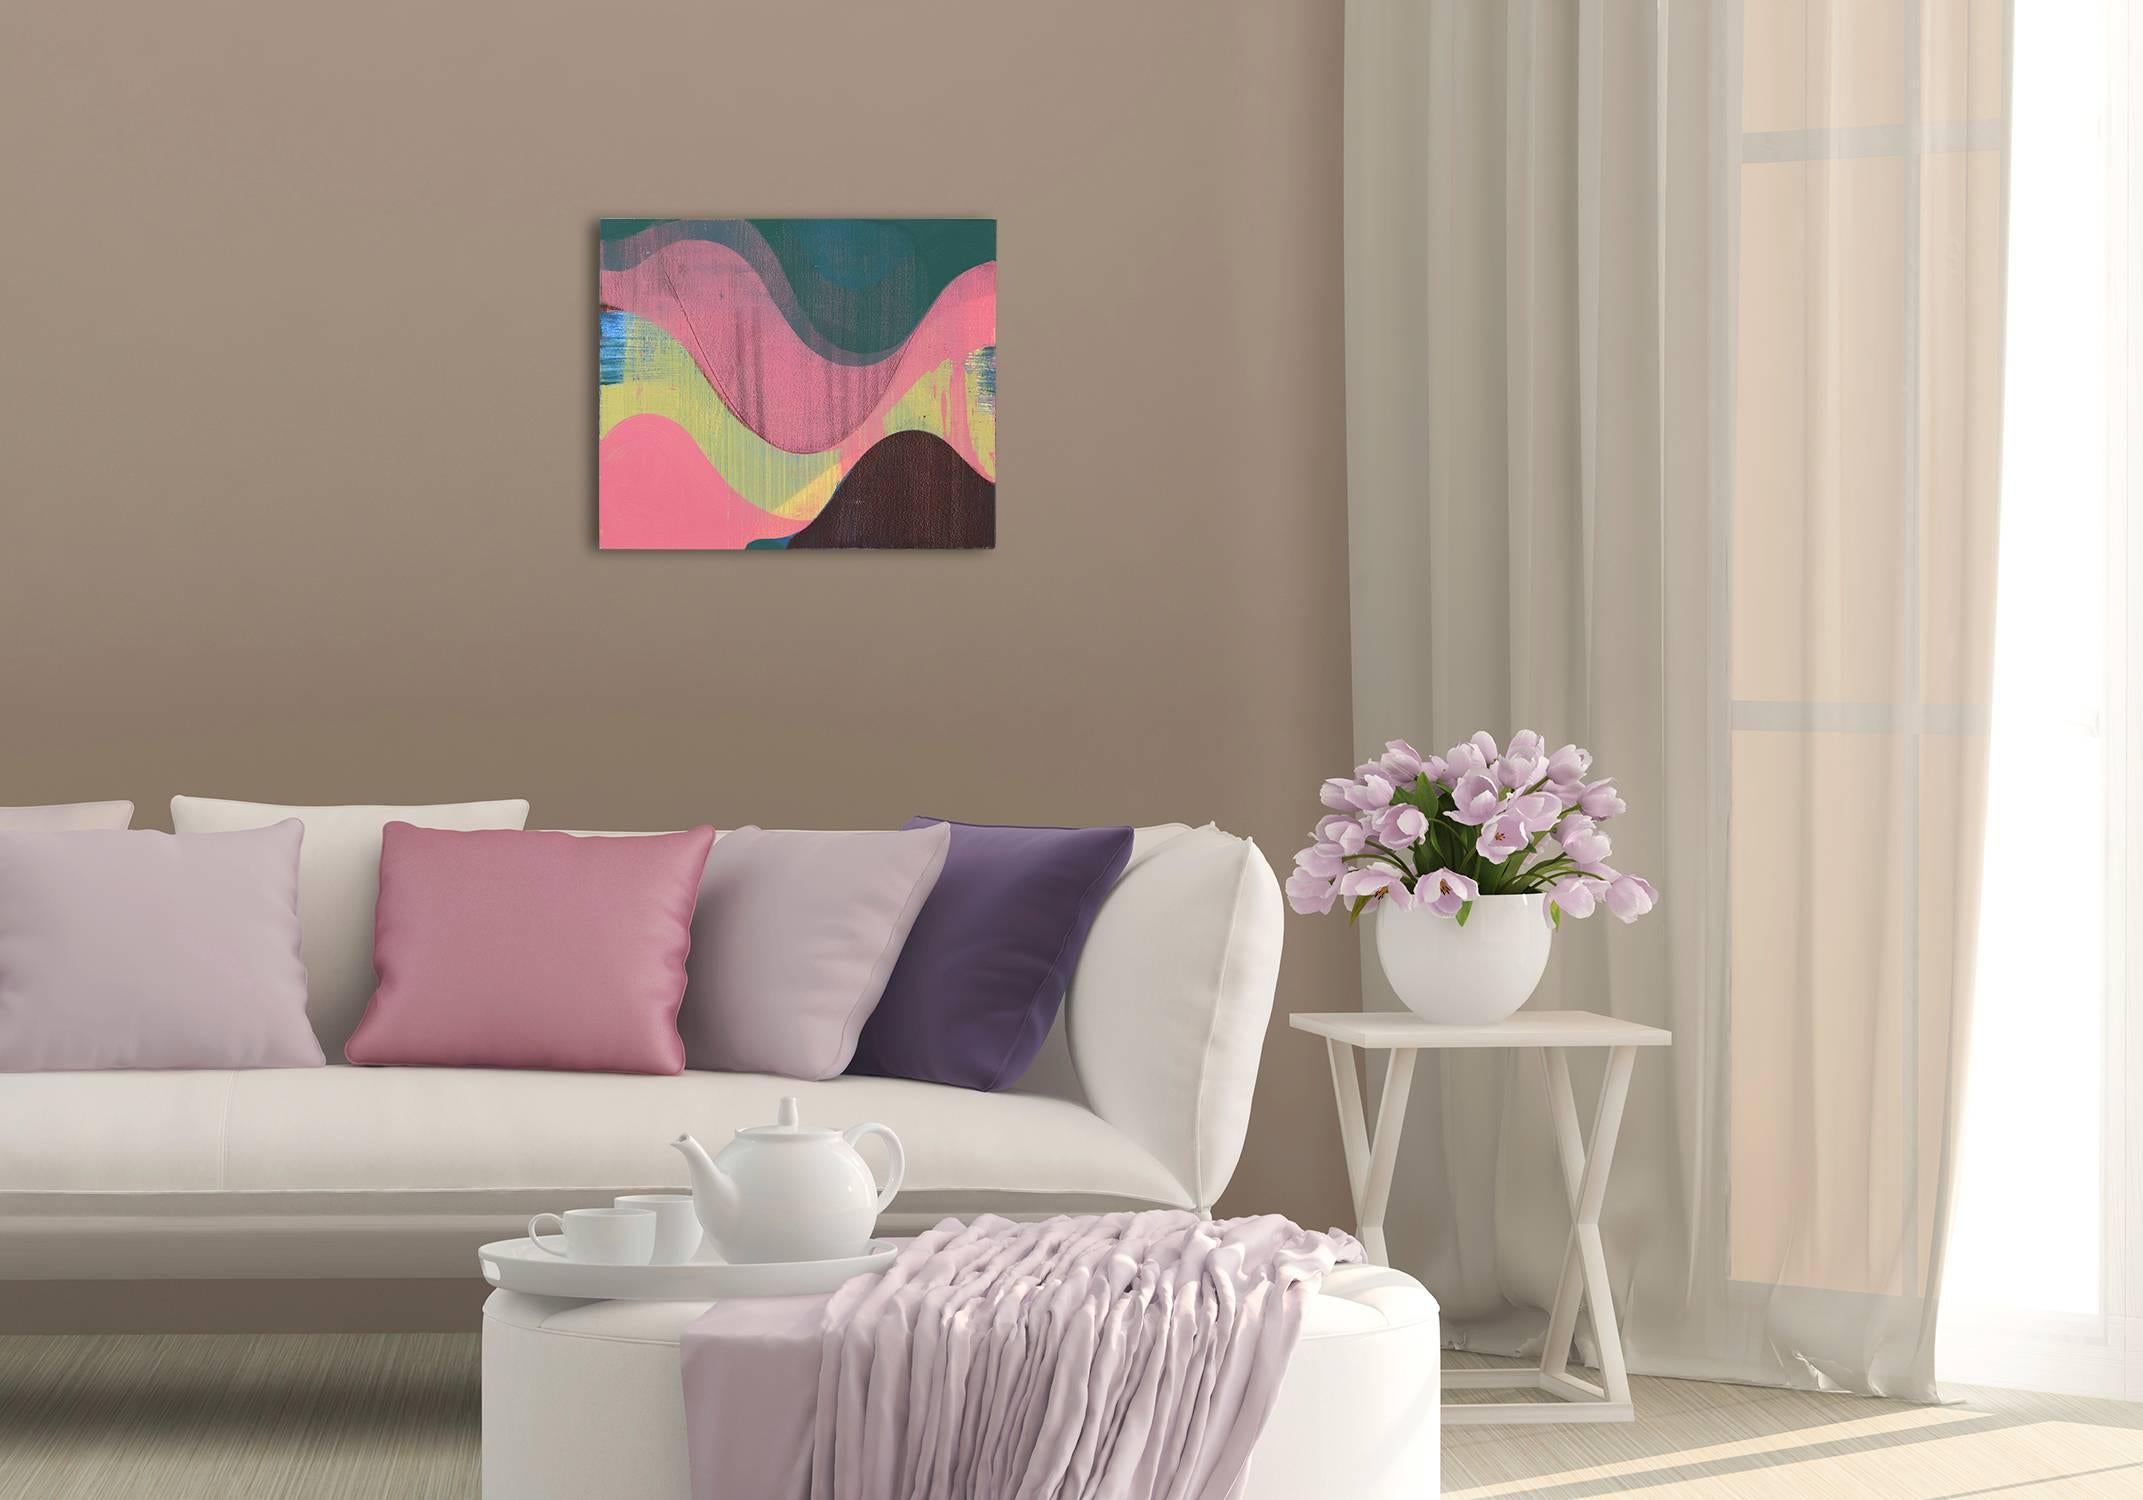 Aviator (Abstract Painting)

Oil on canvas - Unframed

Neill is inspired by the fluid geometric qualities of curve and line, in particular how the natural qualities of the earth and sky intermingle with urban elements of object and